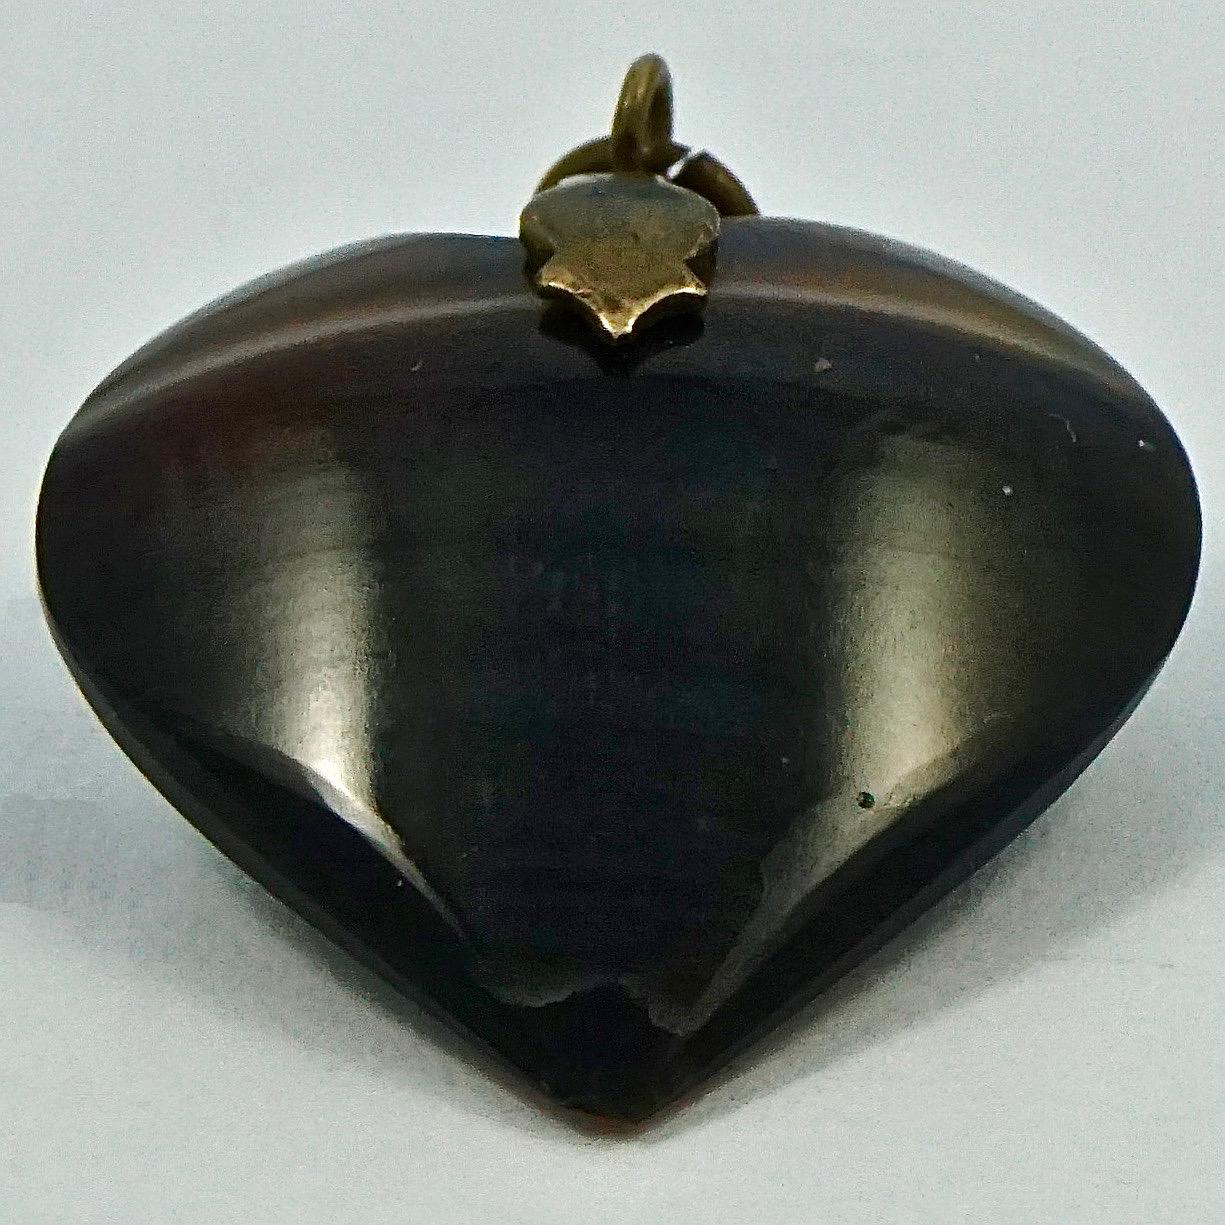 Victorian lovely polished banded agate heart pendant with bronze tone fittings. Measuring length 2.4 cm / .94 inch by width 2.3 cm / .9 inch. The heart is domed, and not flat. There is a chip to the heart at the tip.

This is a beautiful antique